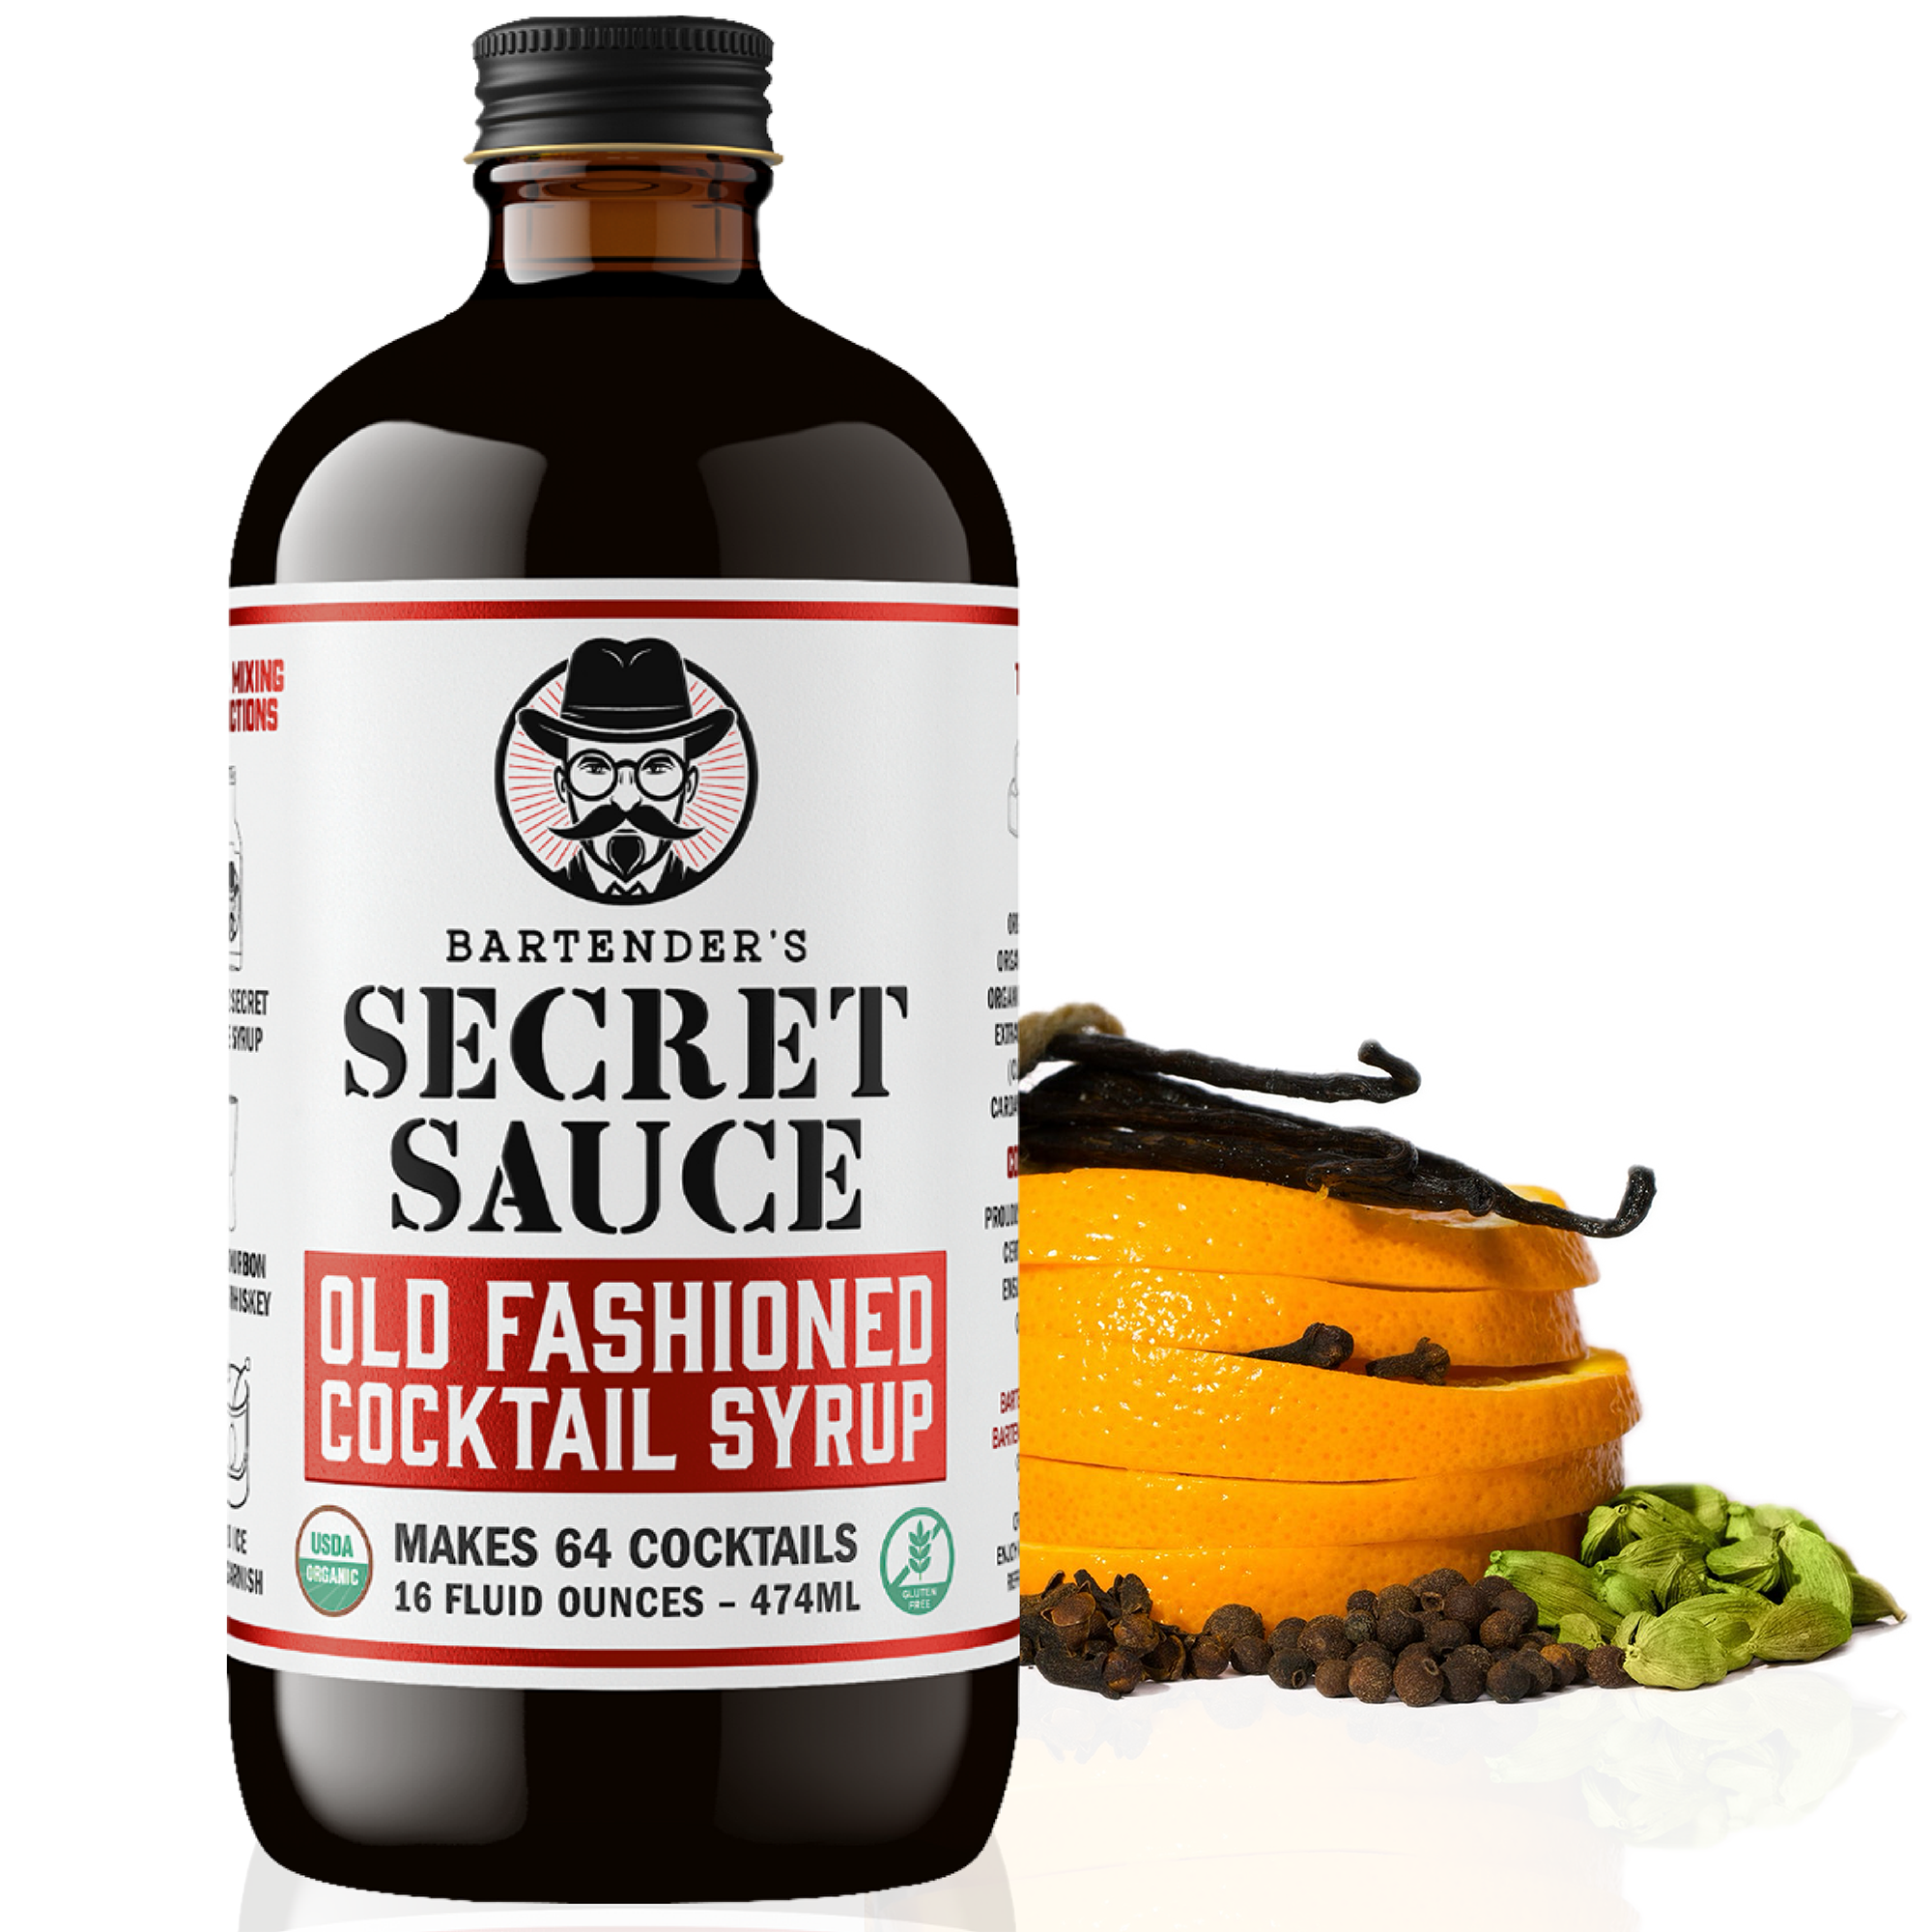 Bartender's Secret Sauce Old Fashioned Cocktail Syrup - 16 Ounce